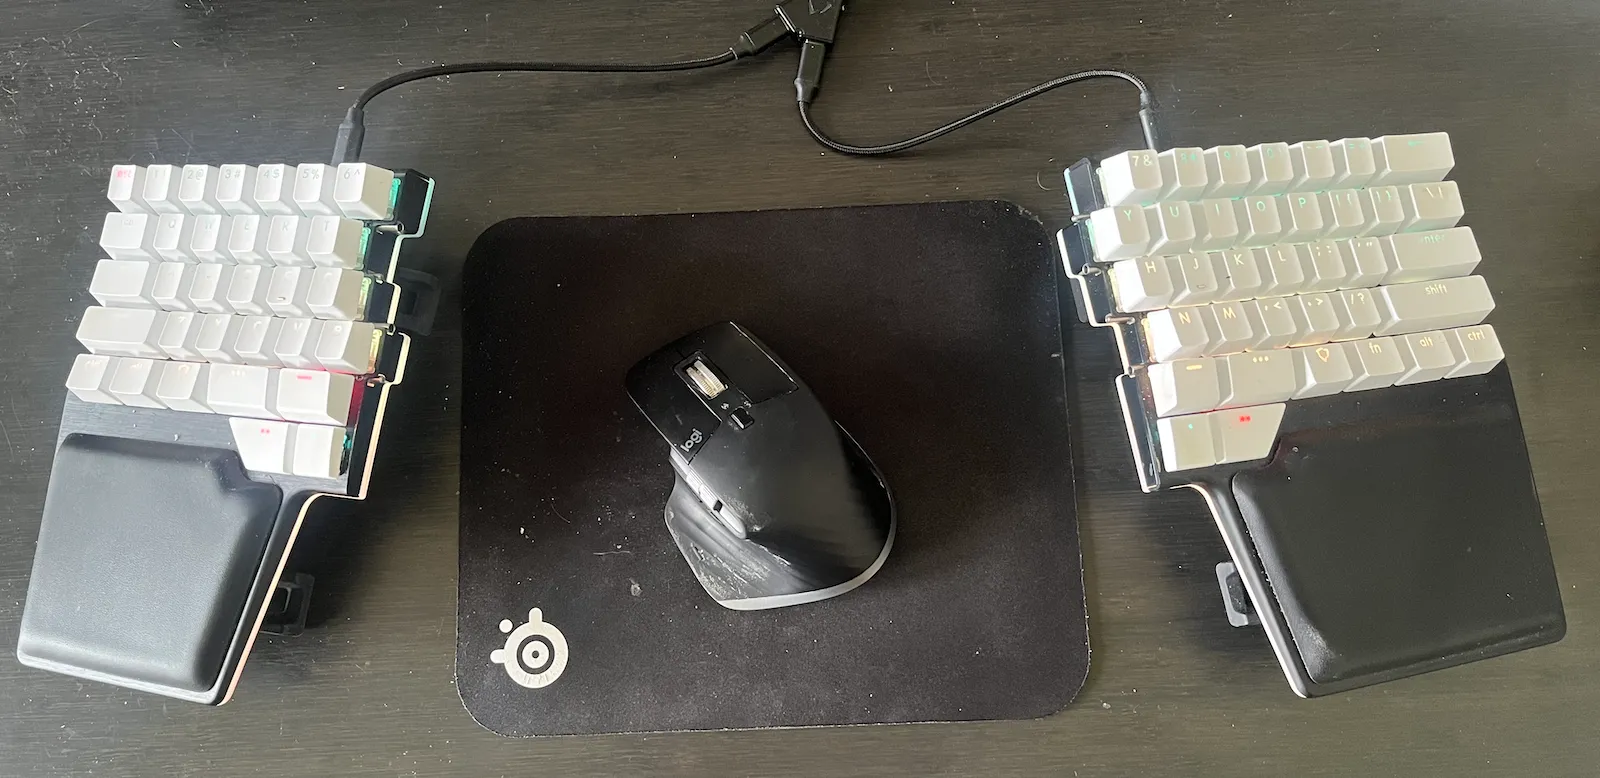 My Dygma Raise keyboard setup with my mouse between the two halves of the keyboard.